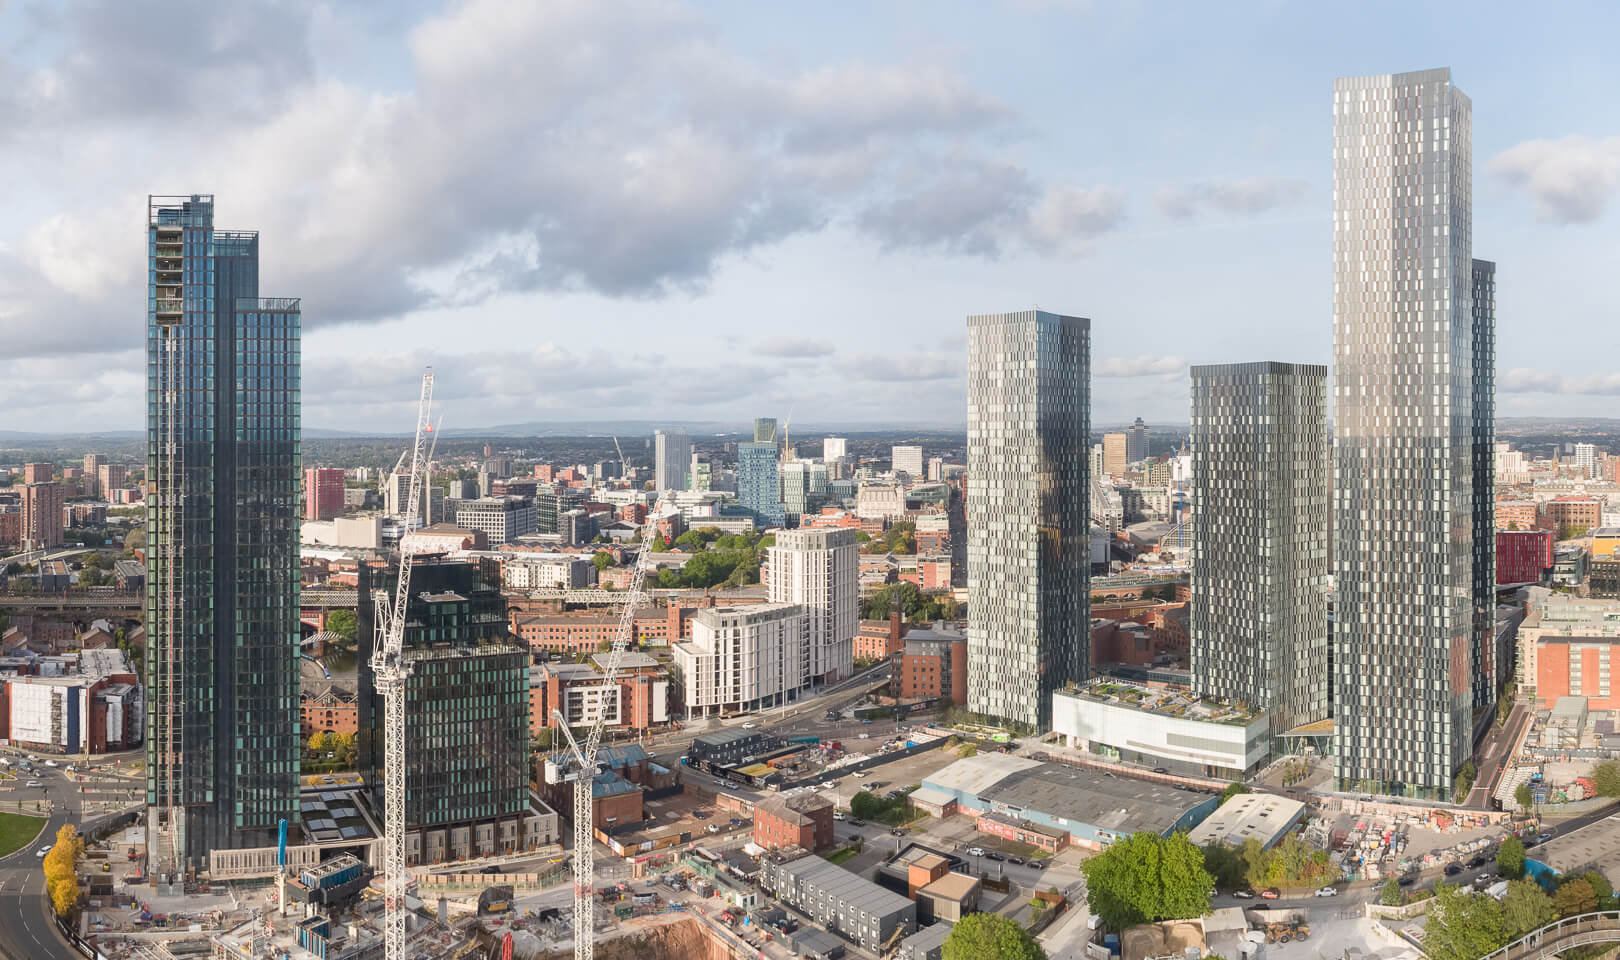 Aerial drone photography of construction progress at the ongoing and completed Renaker developments, Manchester